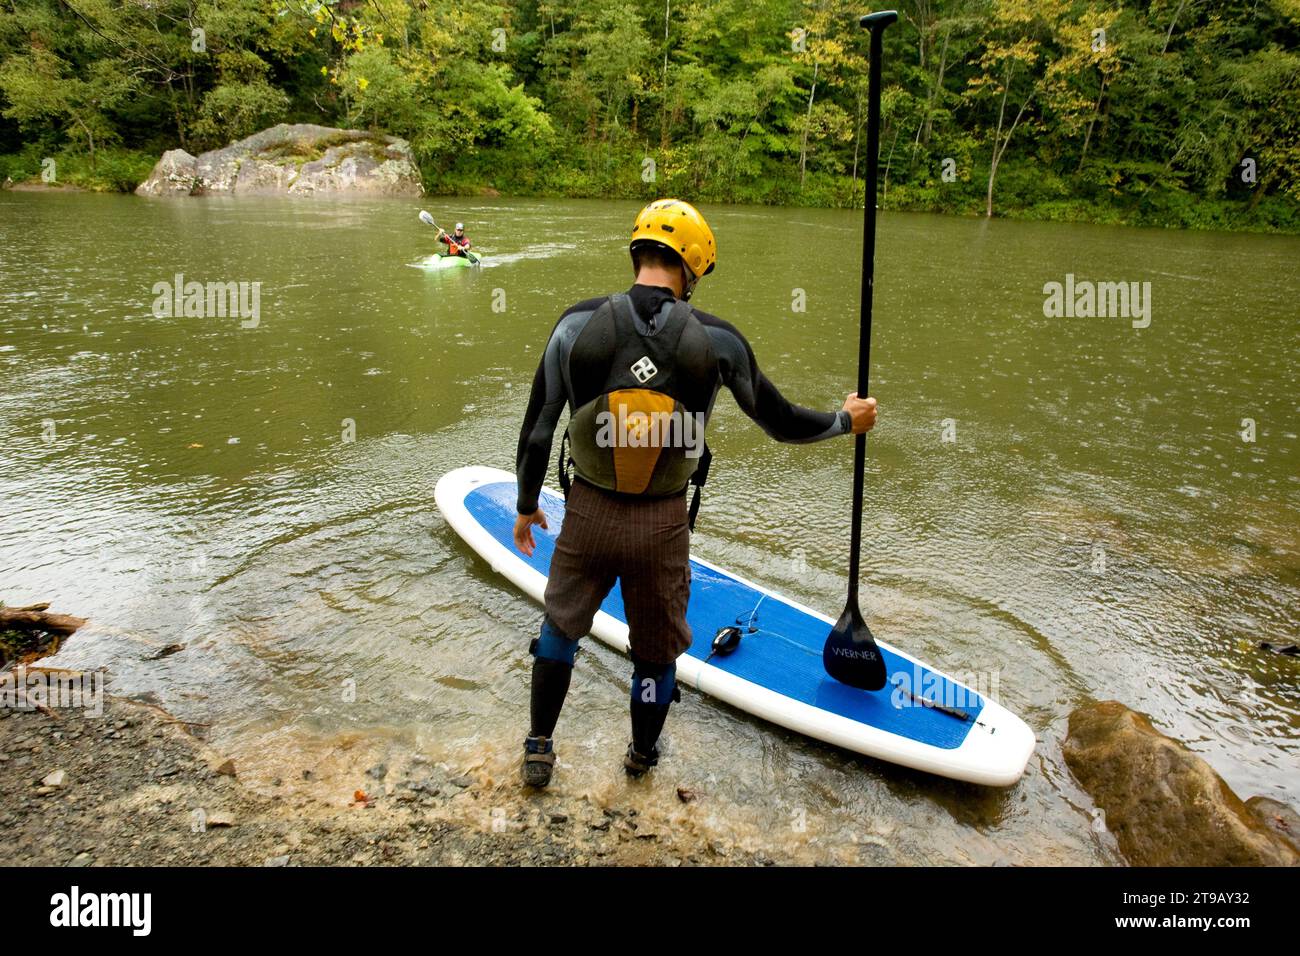 Male stand up paddleboarder getting ready to paddle a river while a kayaker watches from the river. Stock Photo